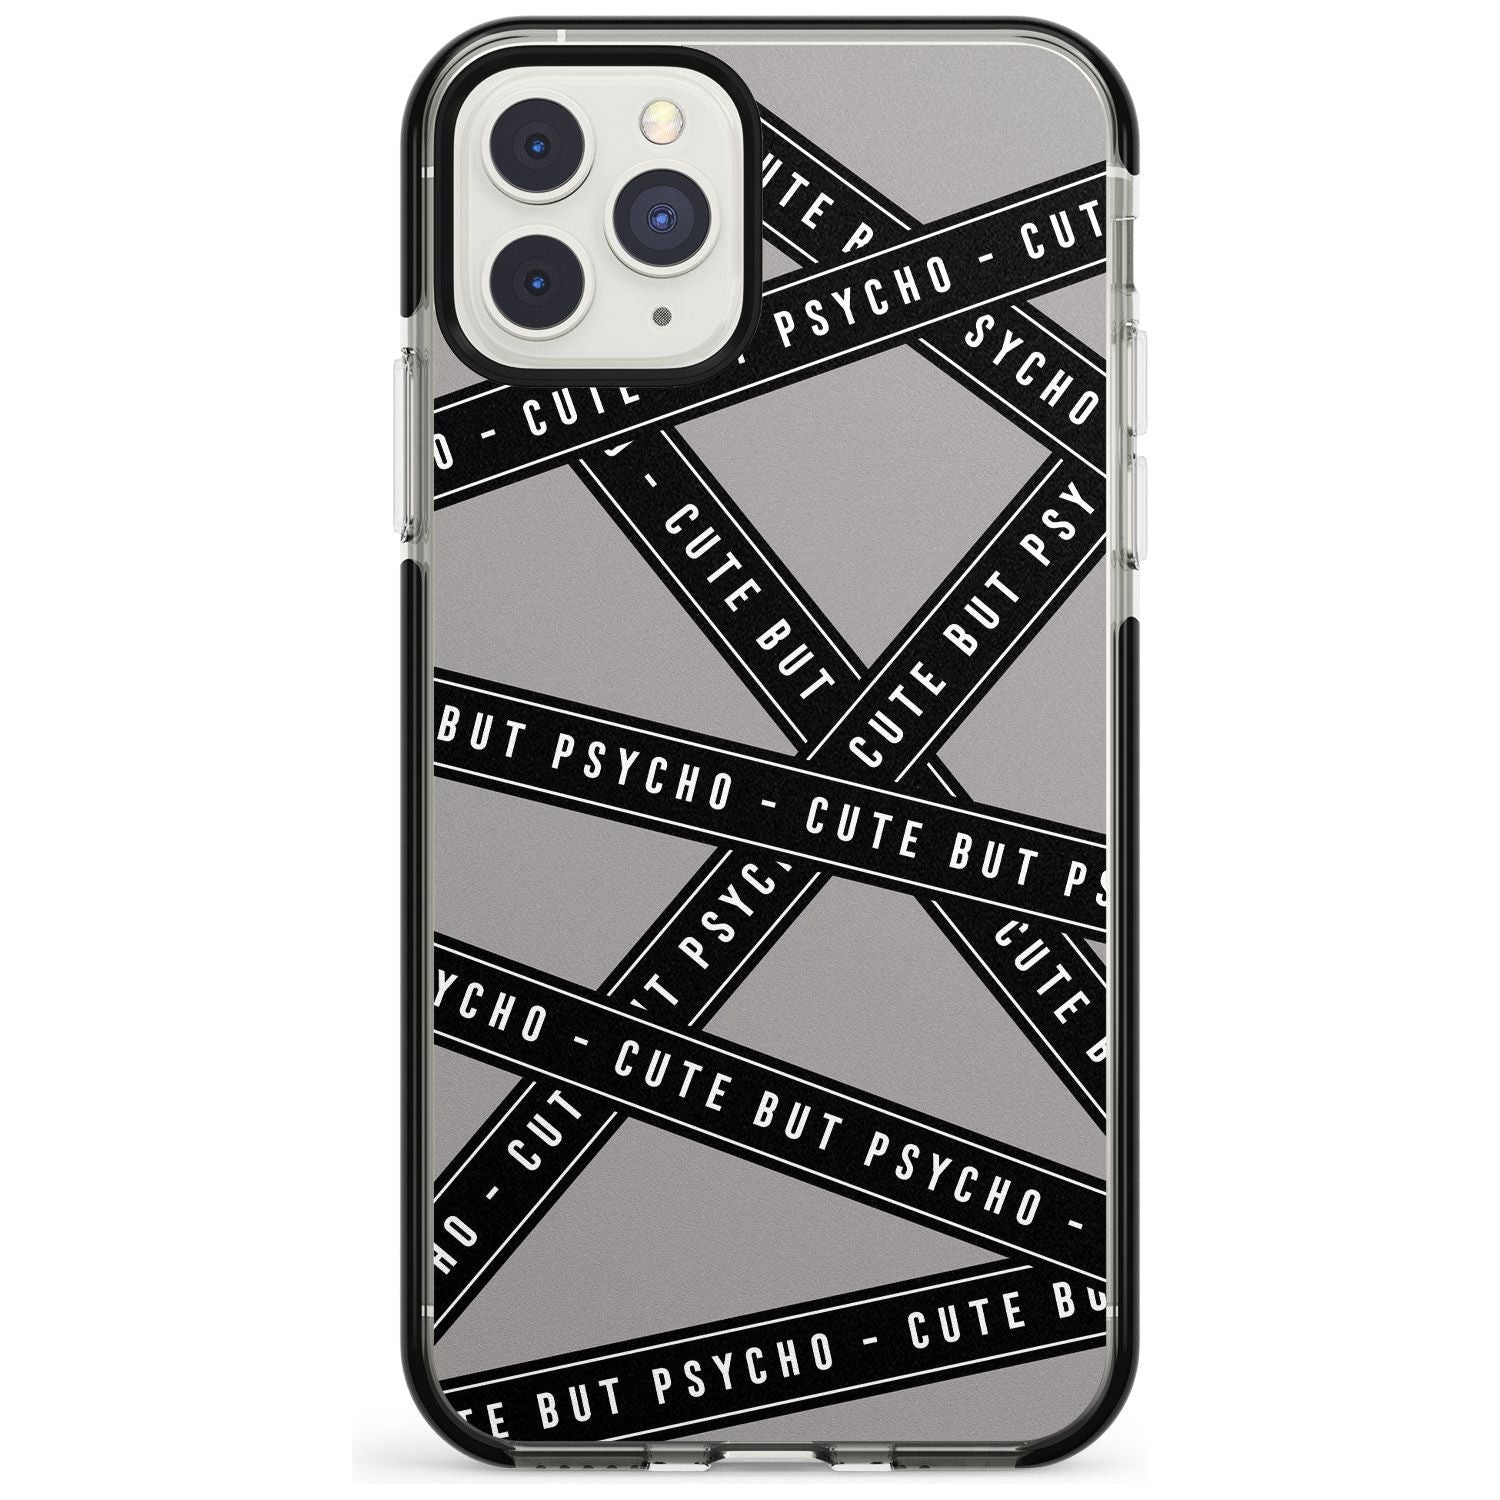 Caution Tape Phrases Cute But Psycho Black Impact Phone Case for iPhone 11 Pro Max